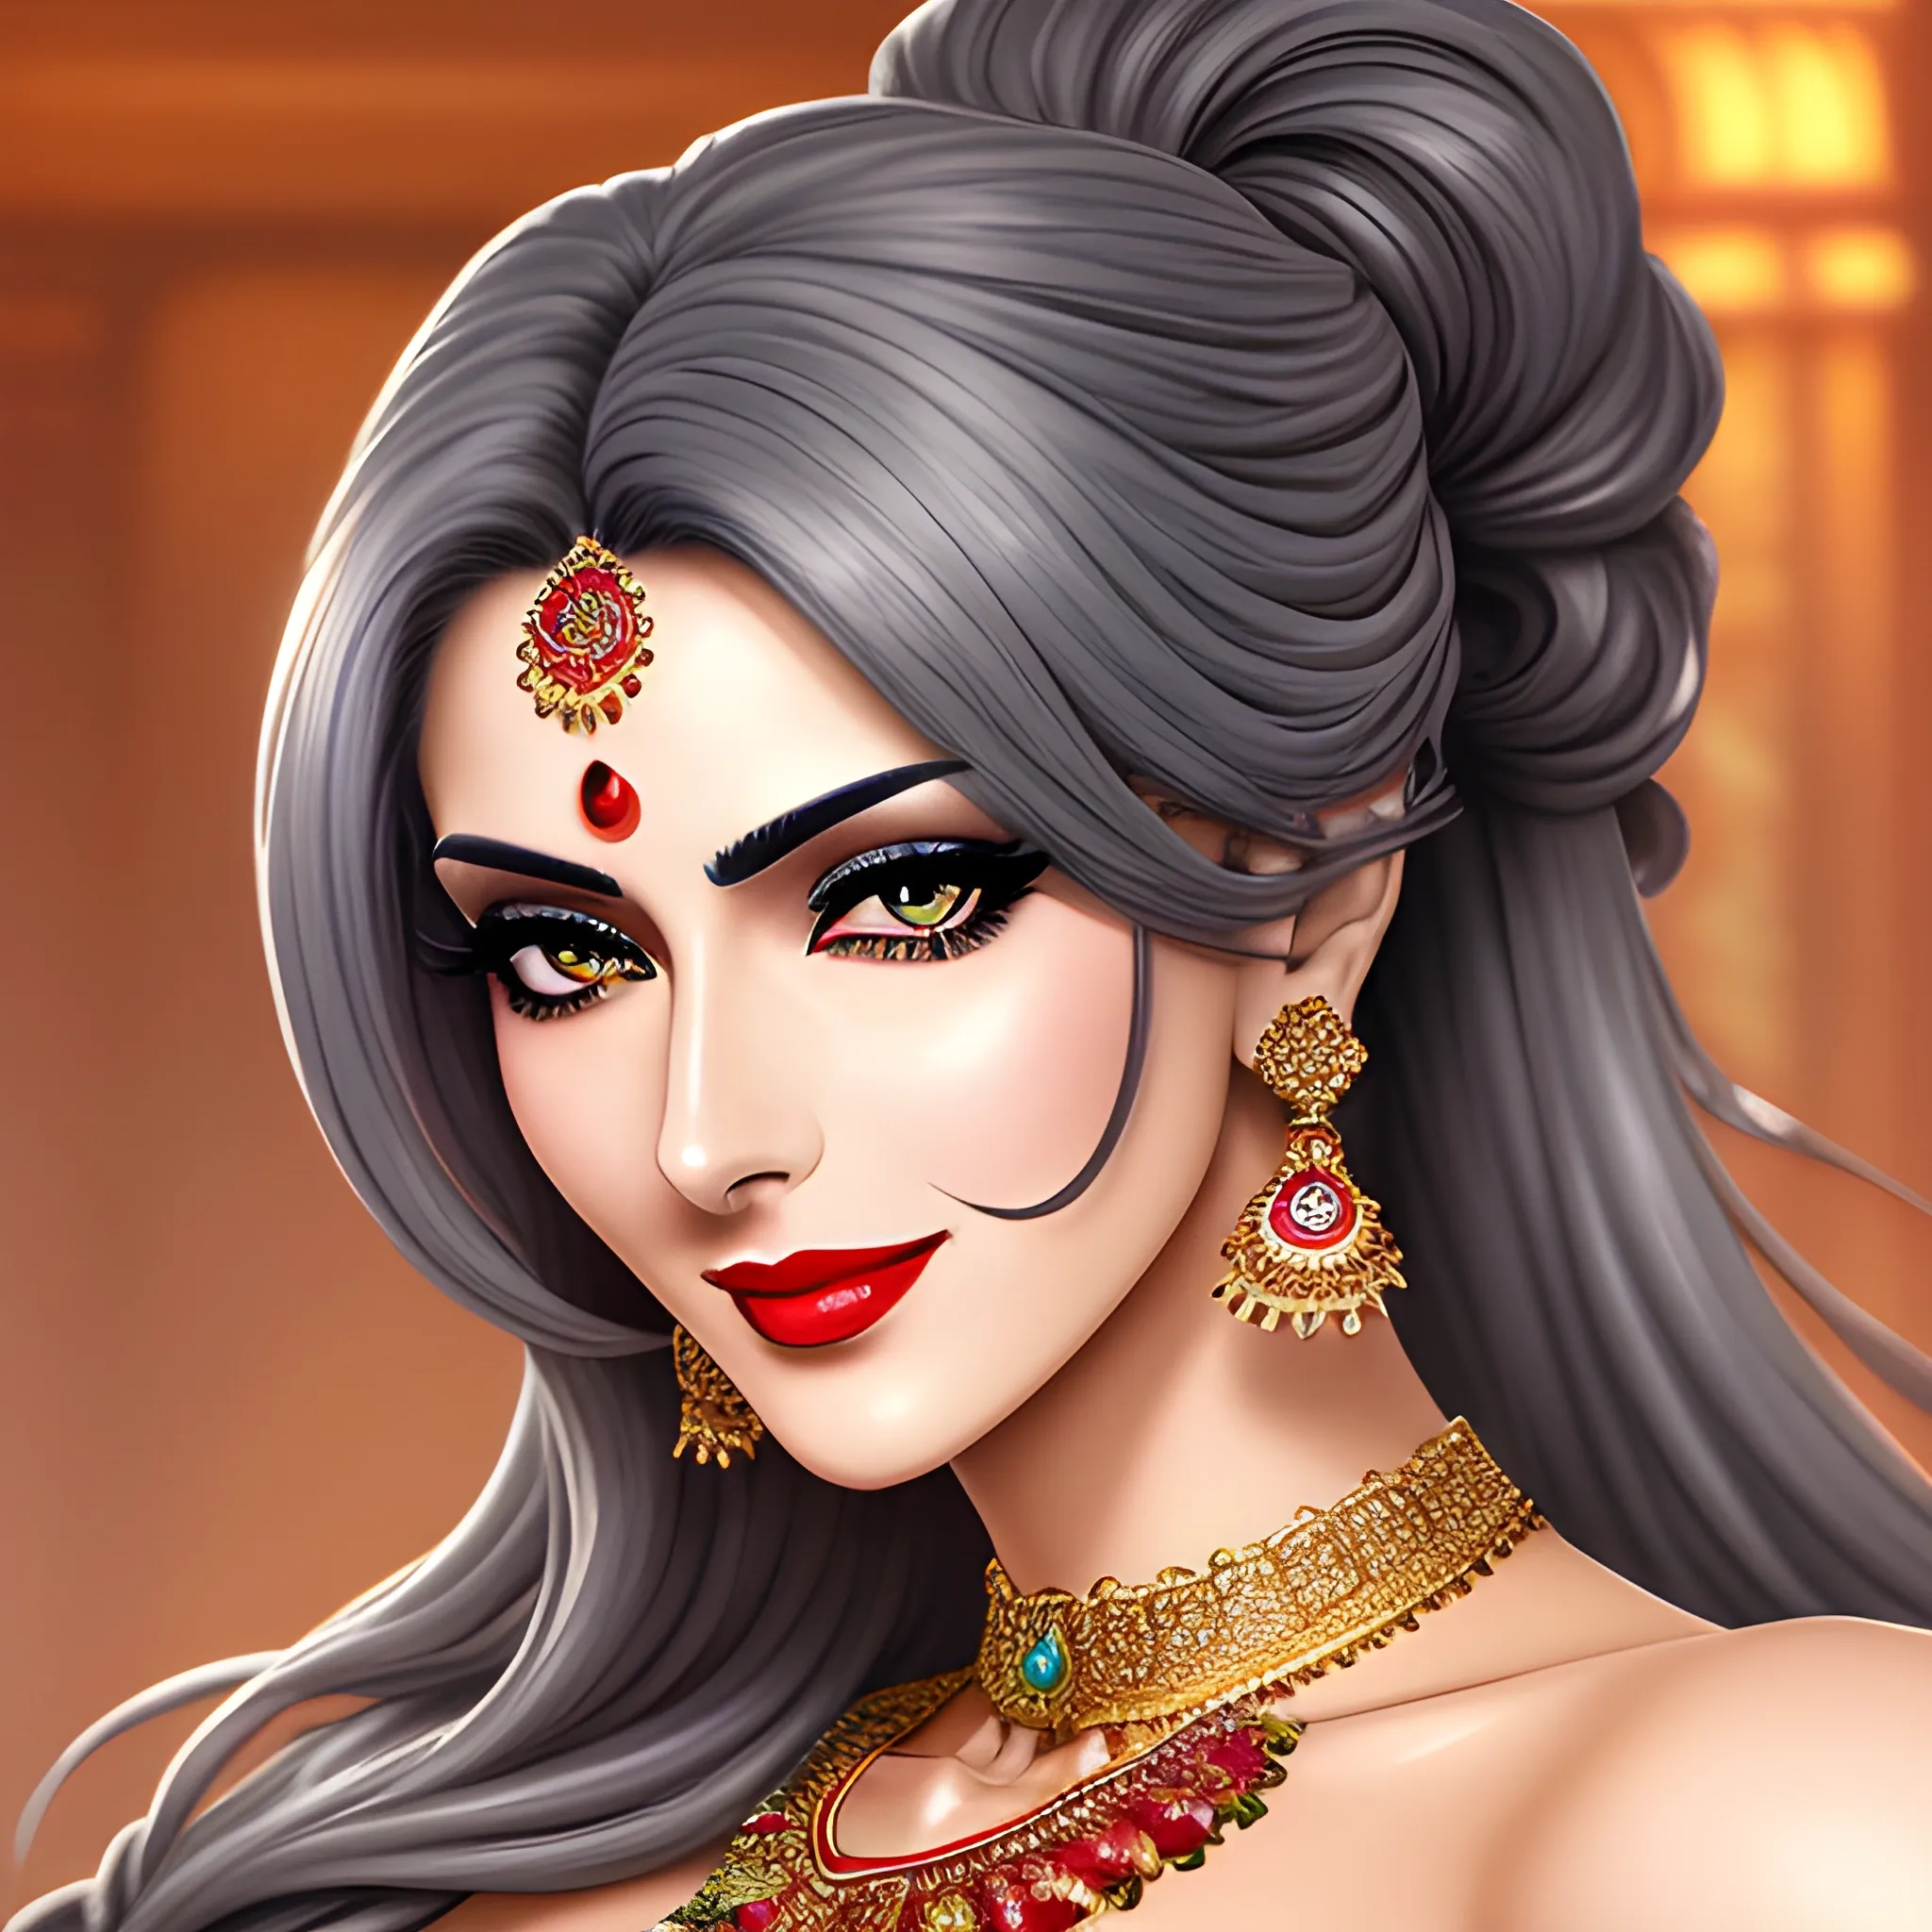 (masterpiece),(best quality:1.0), (ultra highres:1.0), detailed illustration, 8k, anime, 1girl, beautiful anime girl, in a sari, wearing a grey sari, pretty face, detailed face, beautiful eyes, detailed eyes, red lips, red lipstick, smiling, beautiful hair, highlights in hair, pretty earrings, detailed, anime style, best quality